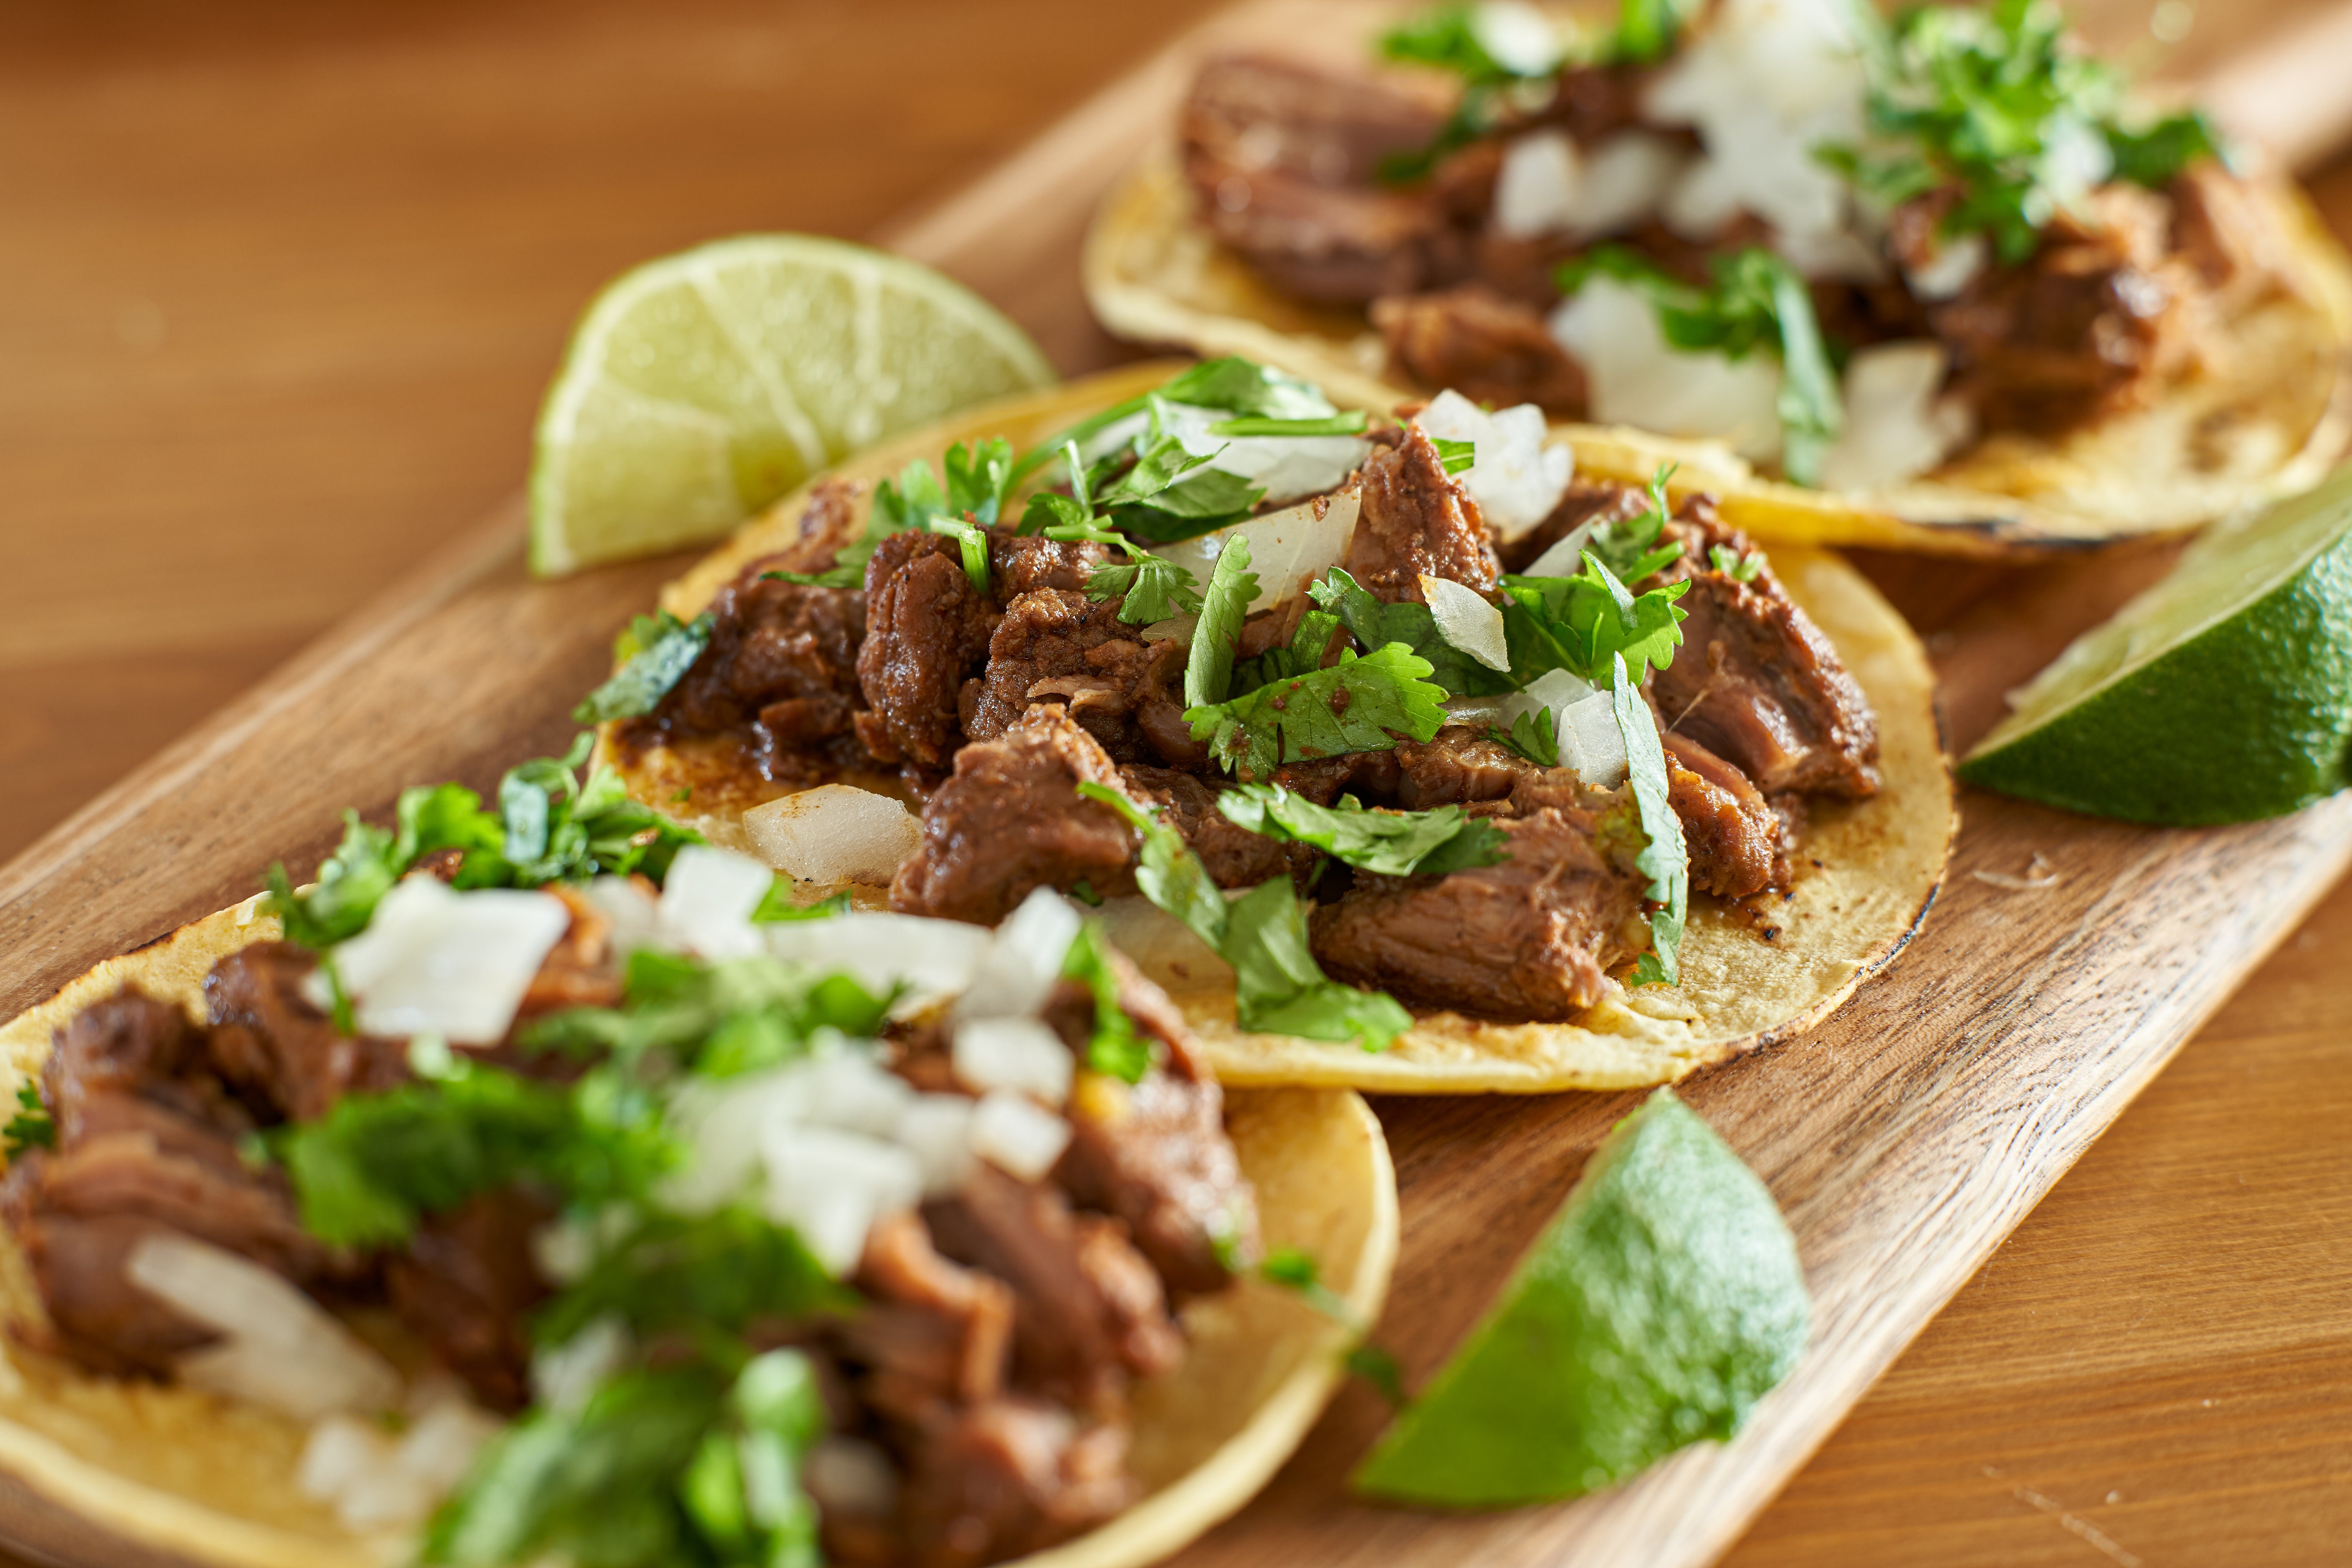 When replicating carne asada, there are some traditional rules to follow